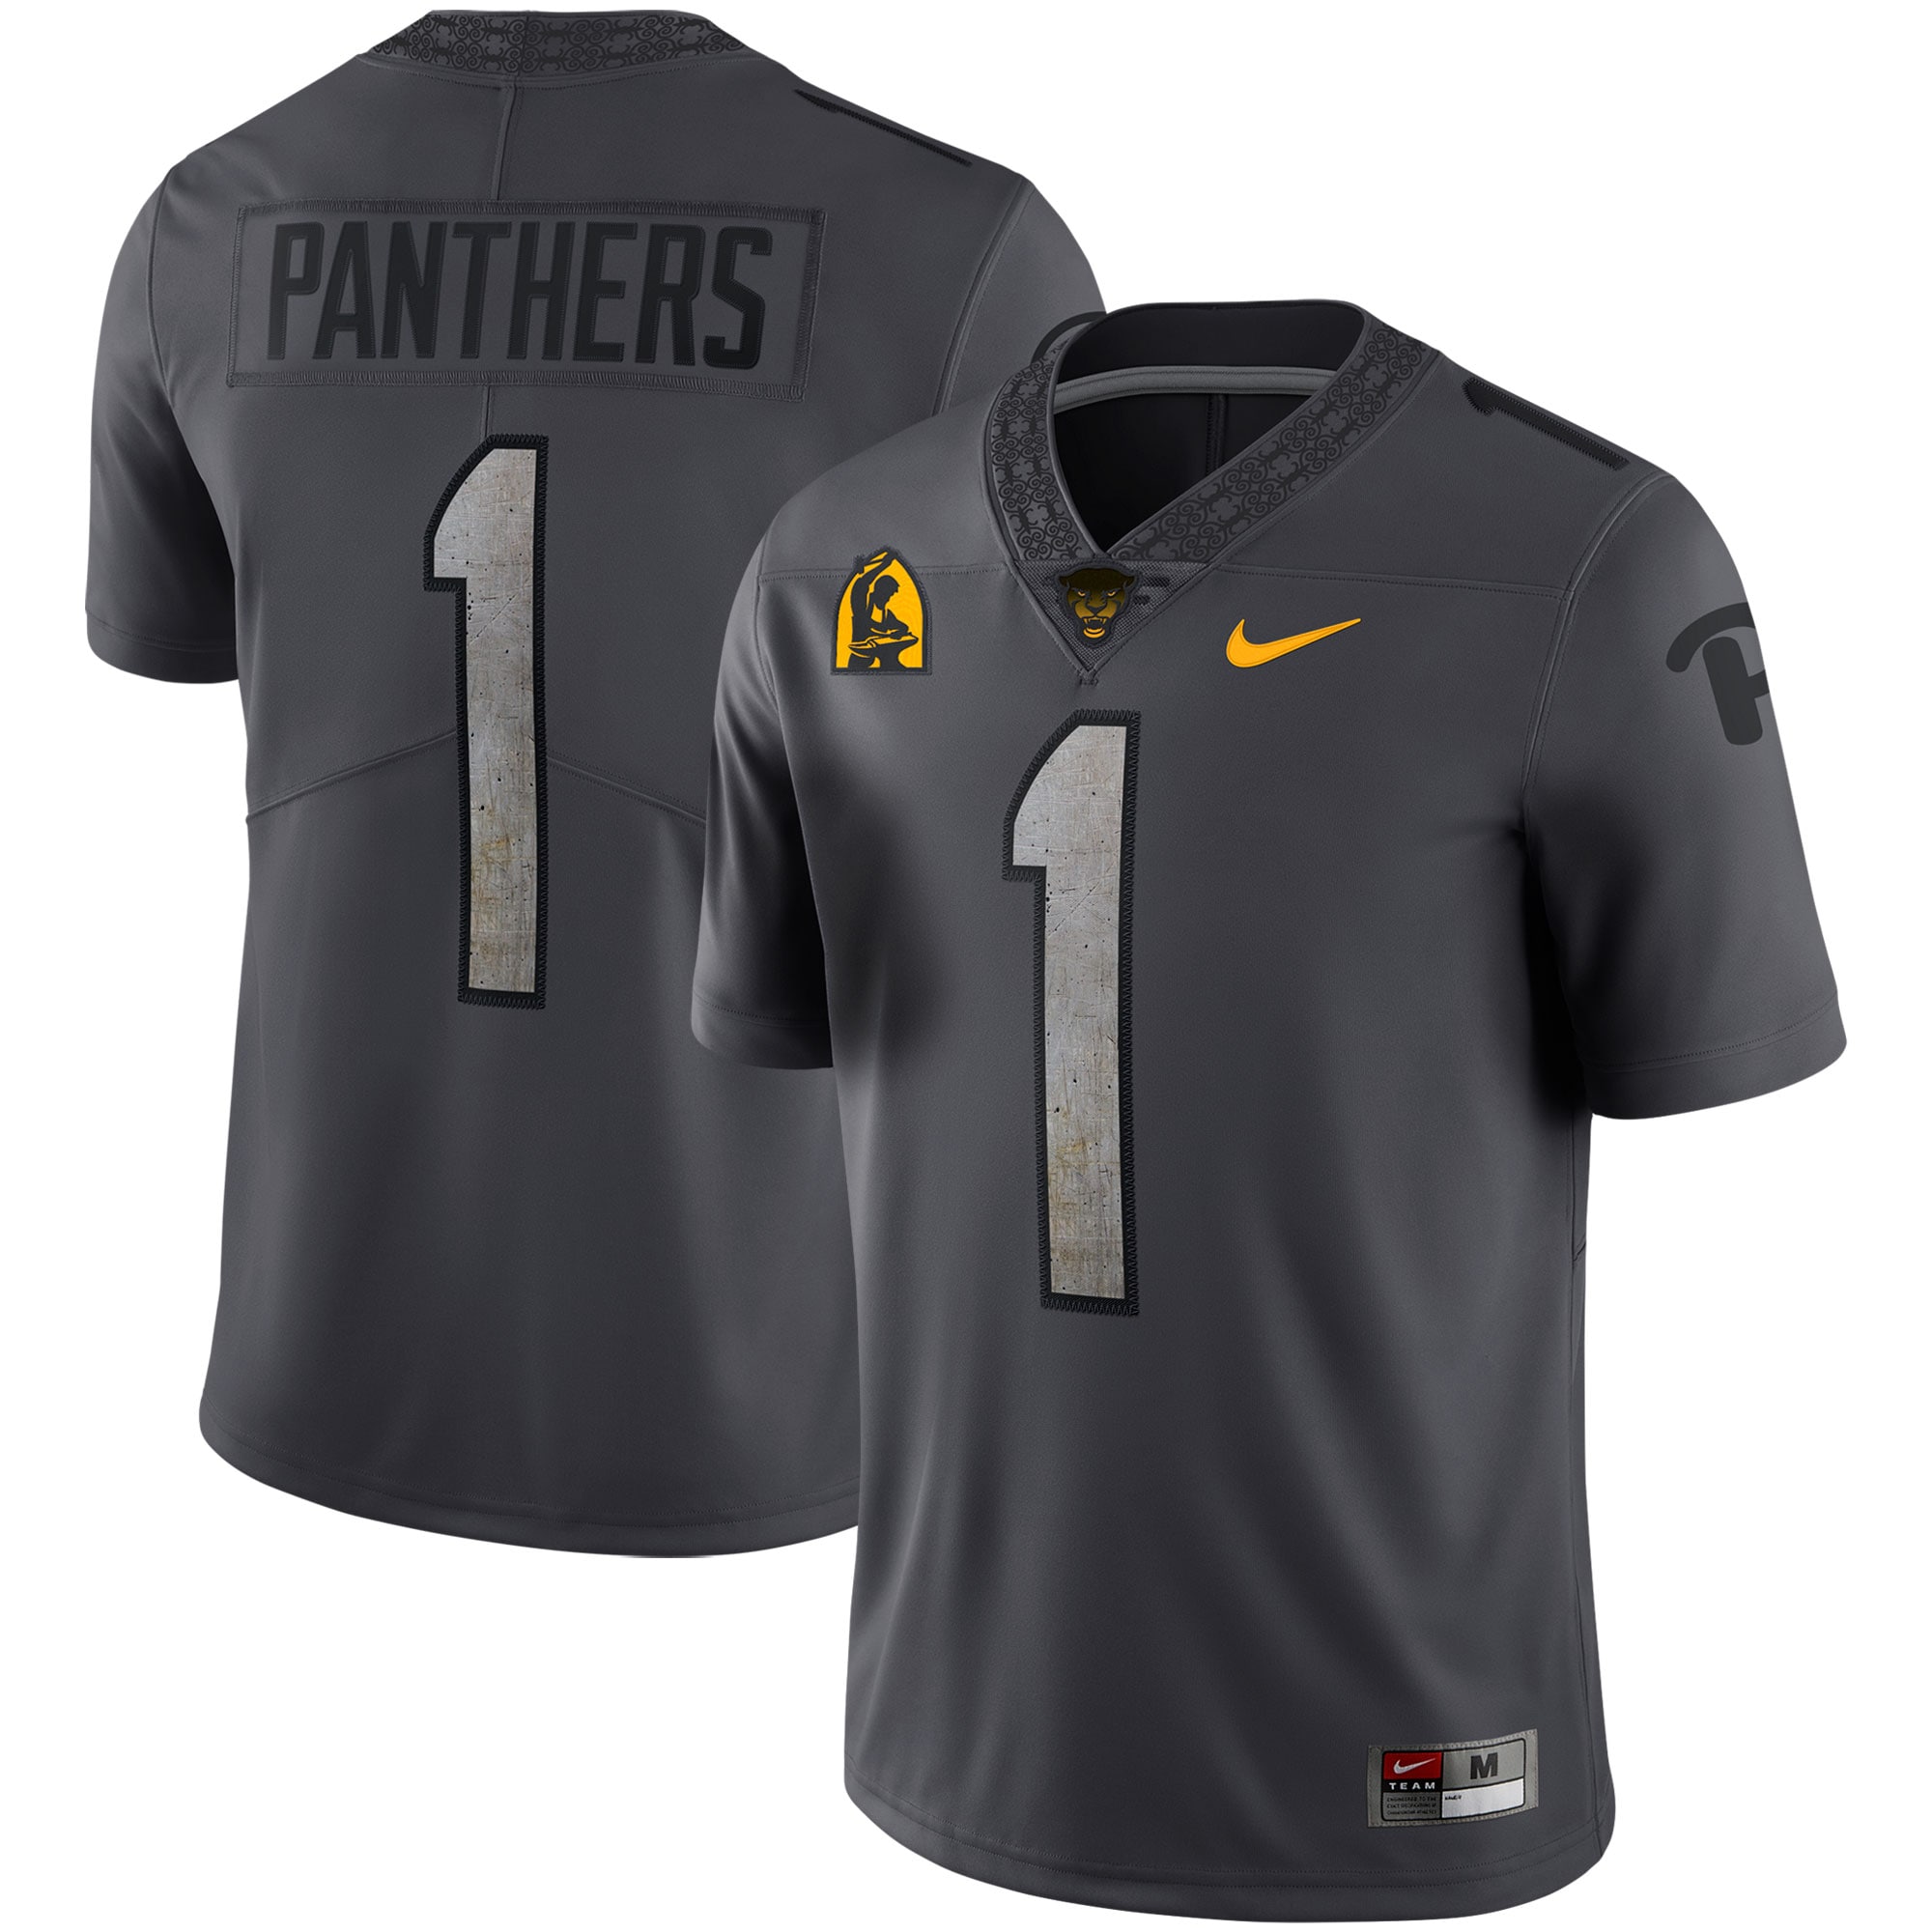 #1 Pitt Panthers Alternate Limited Jersey - Anthracite For Youth Women Men